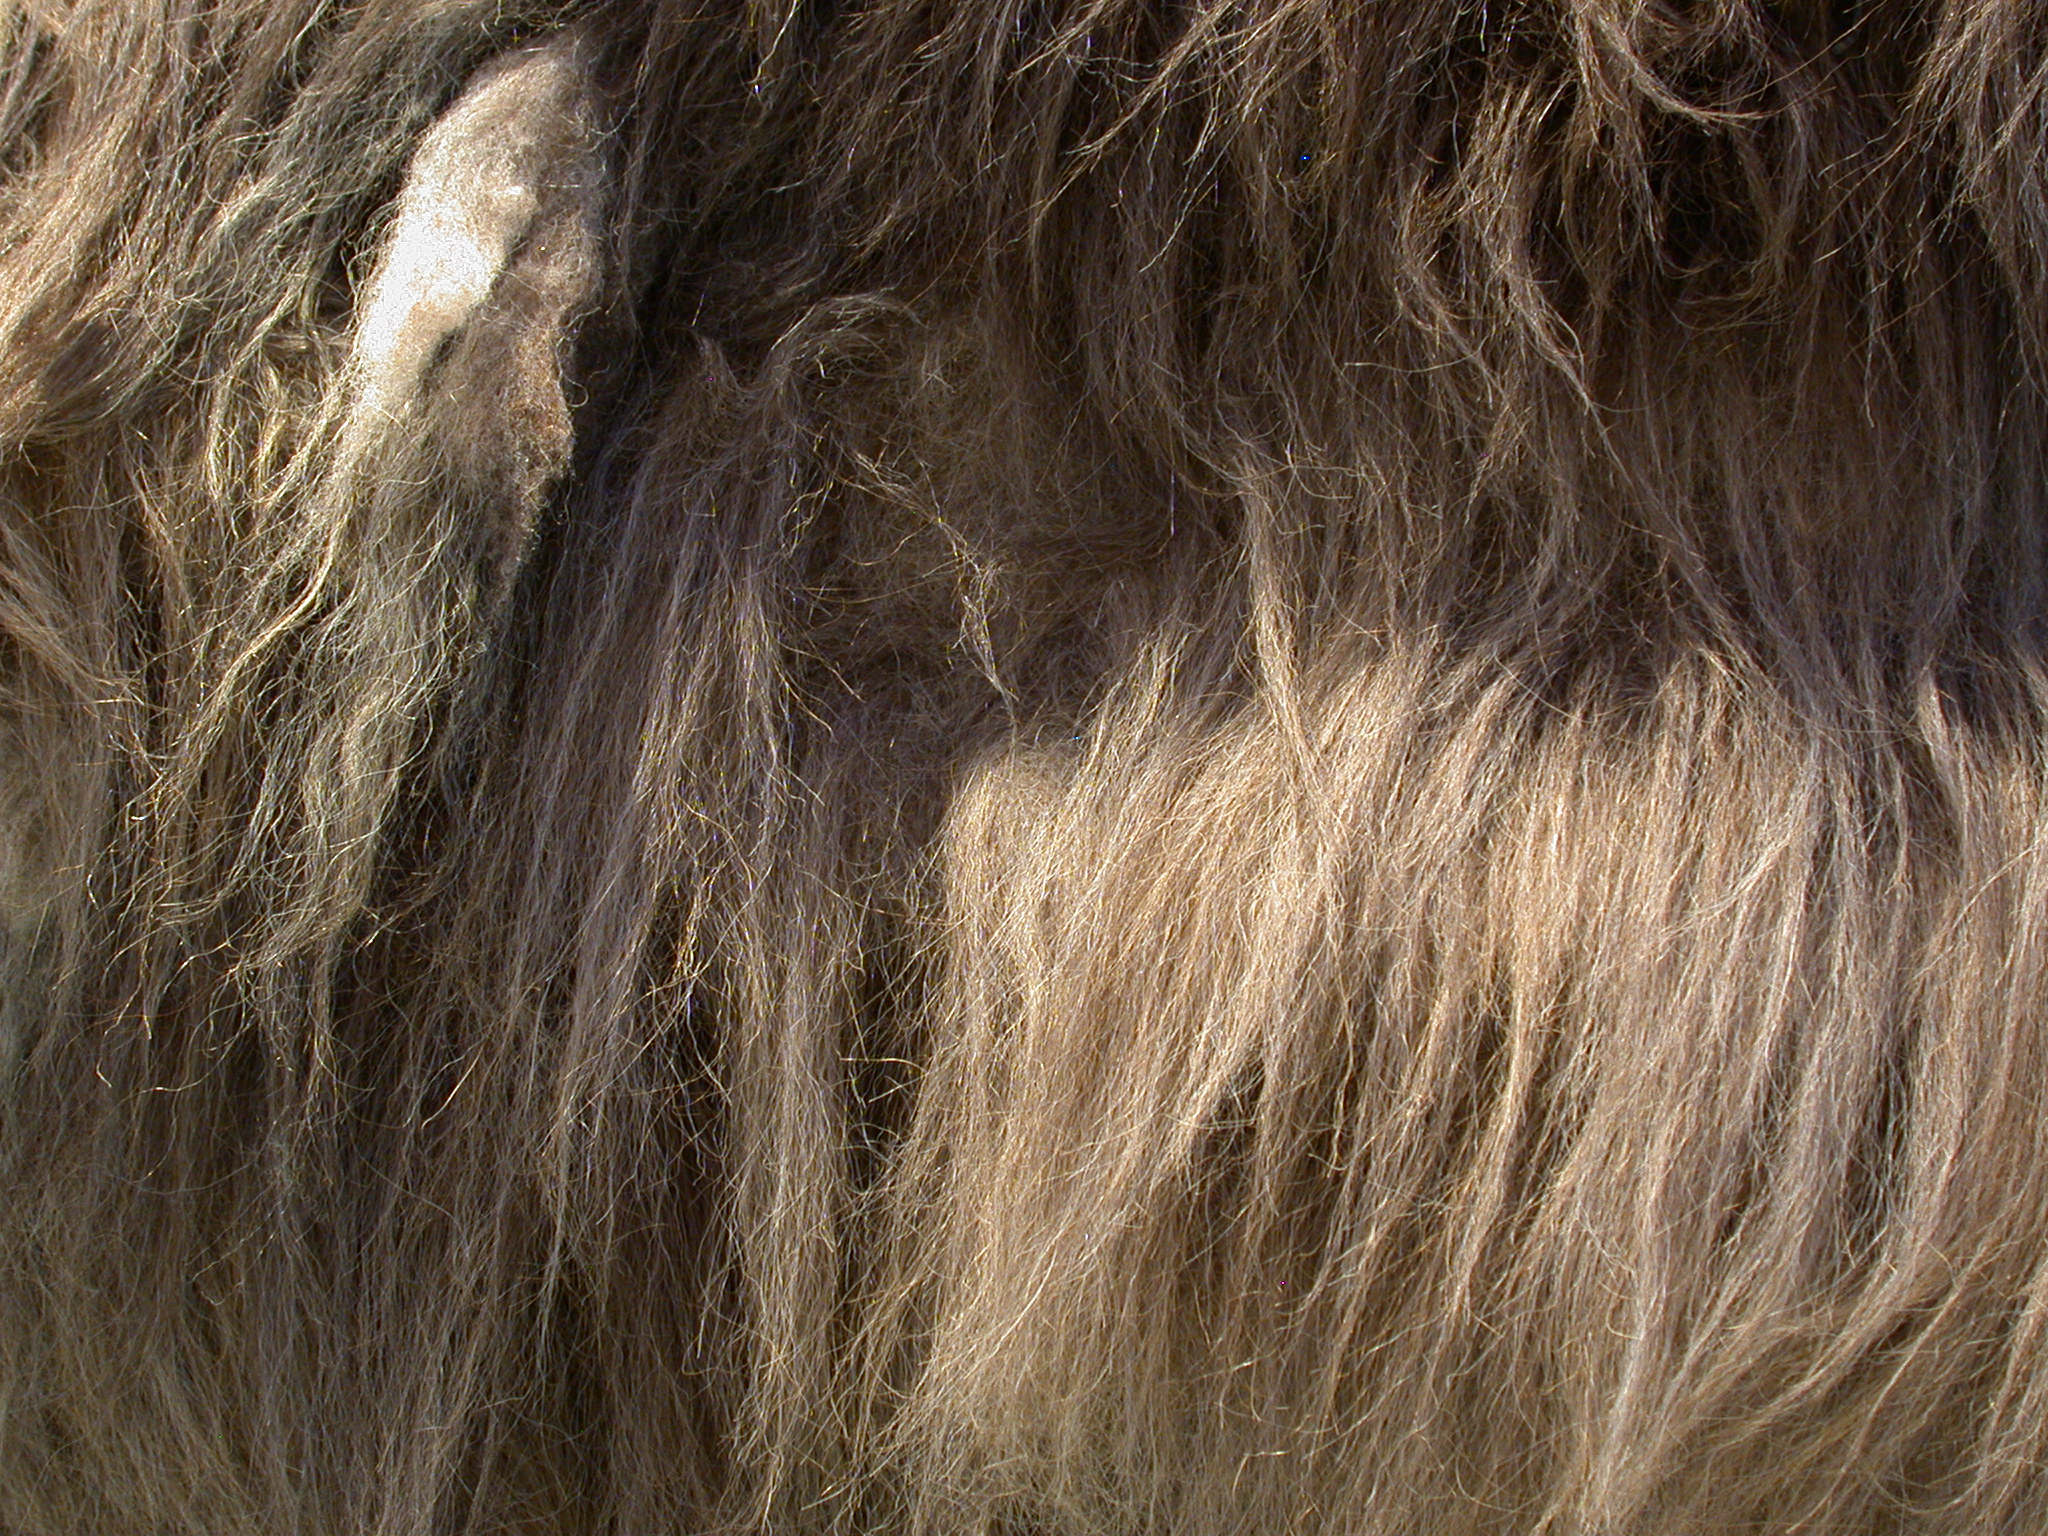 Image*After : textures : hair texture fur animal coarse